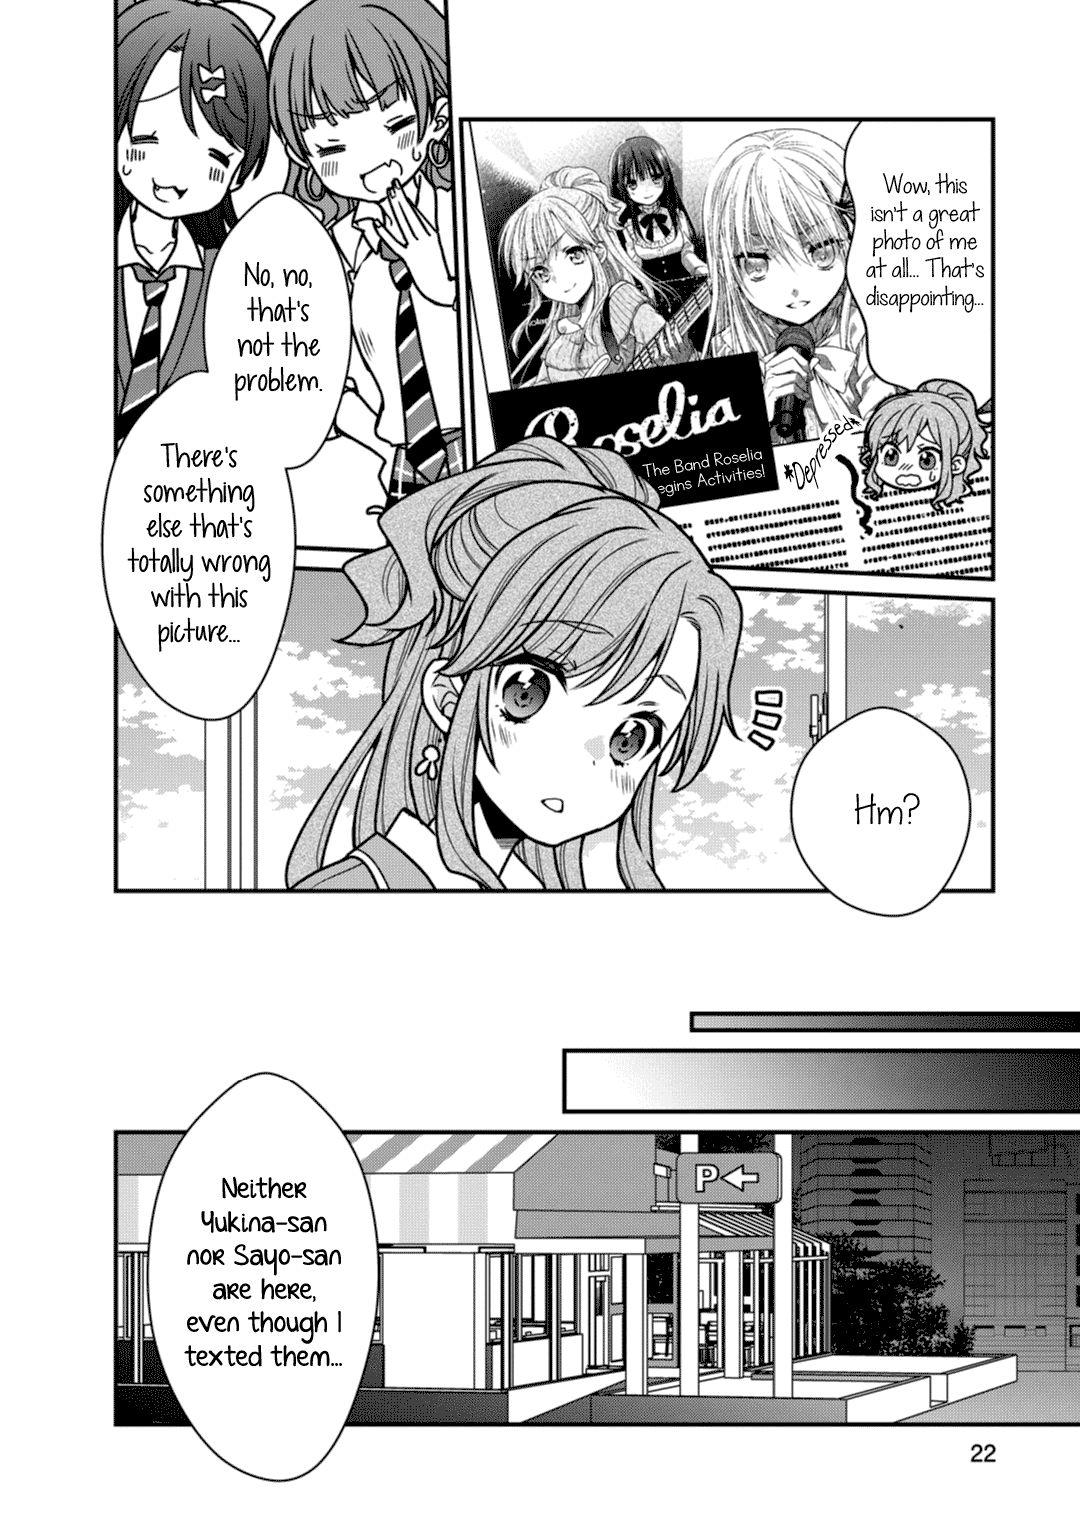 BanG Dream! Girls Band Party! Roselia Stage Vol. 2 Ch. 6 The Younger Twin Sister